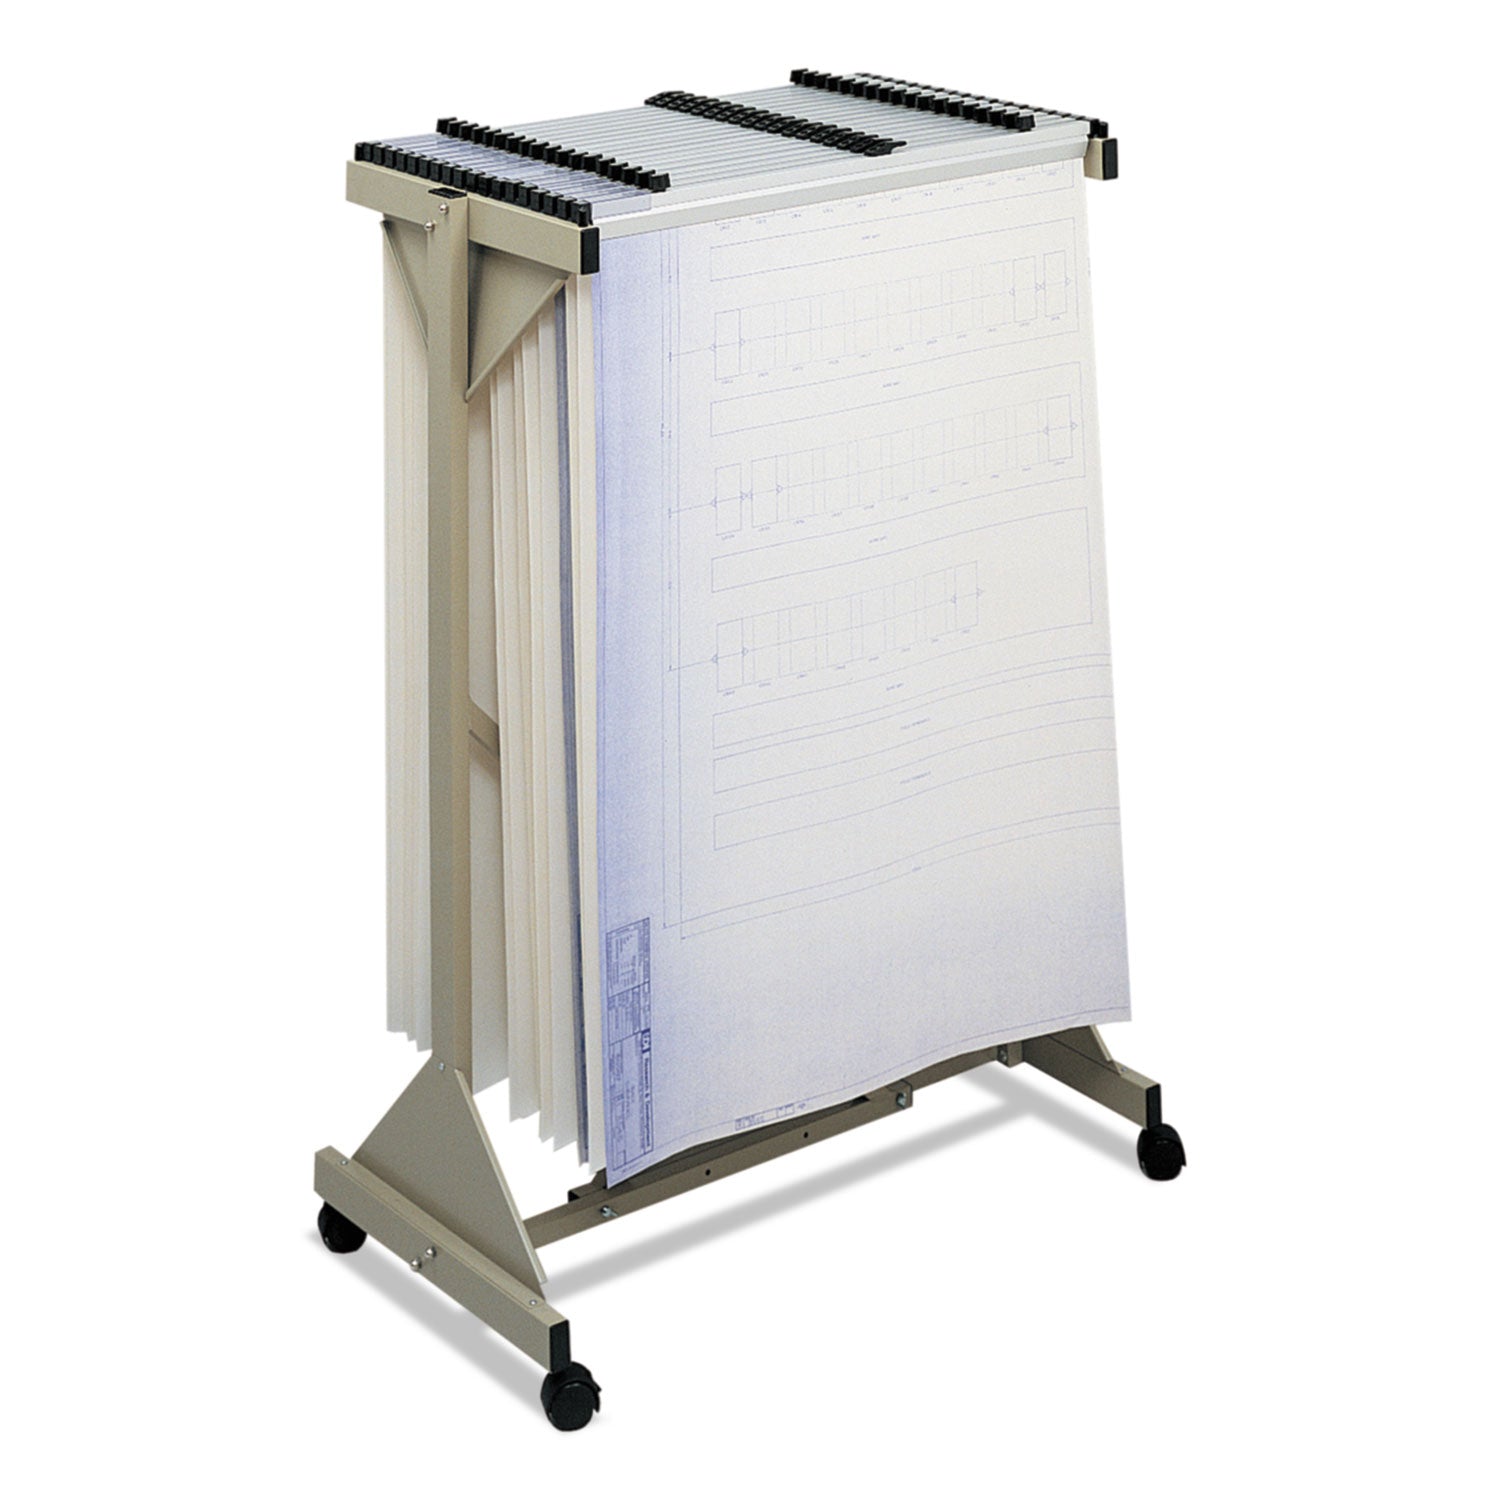 Mobile Plan Center Sheet Rack, 18 Hanging Clamps, 43.75w x 20.5d x 51h, Sand - 